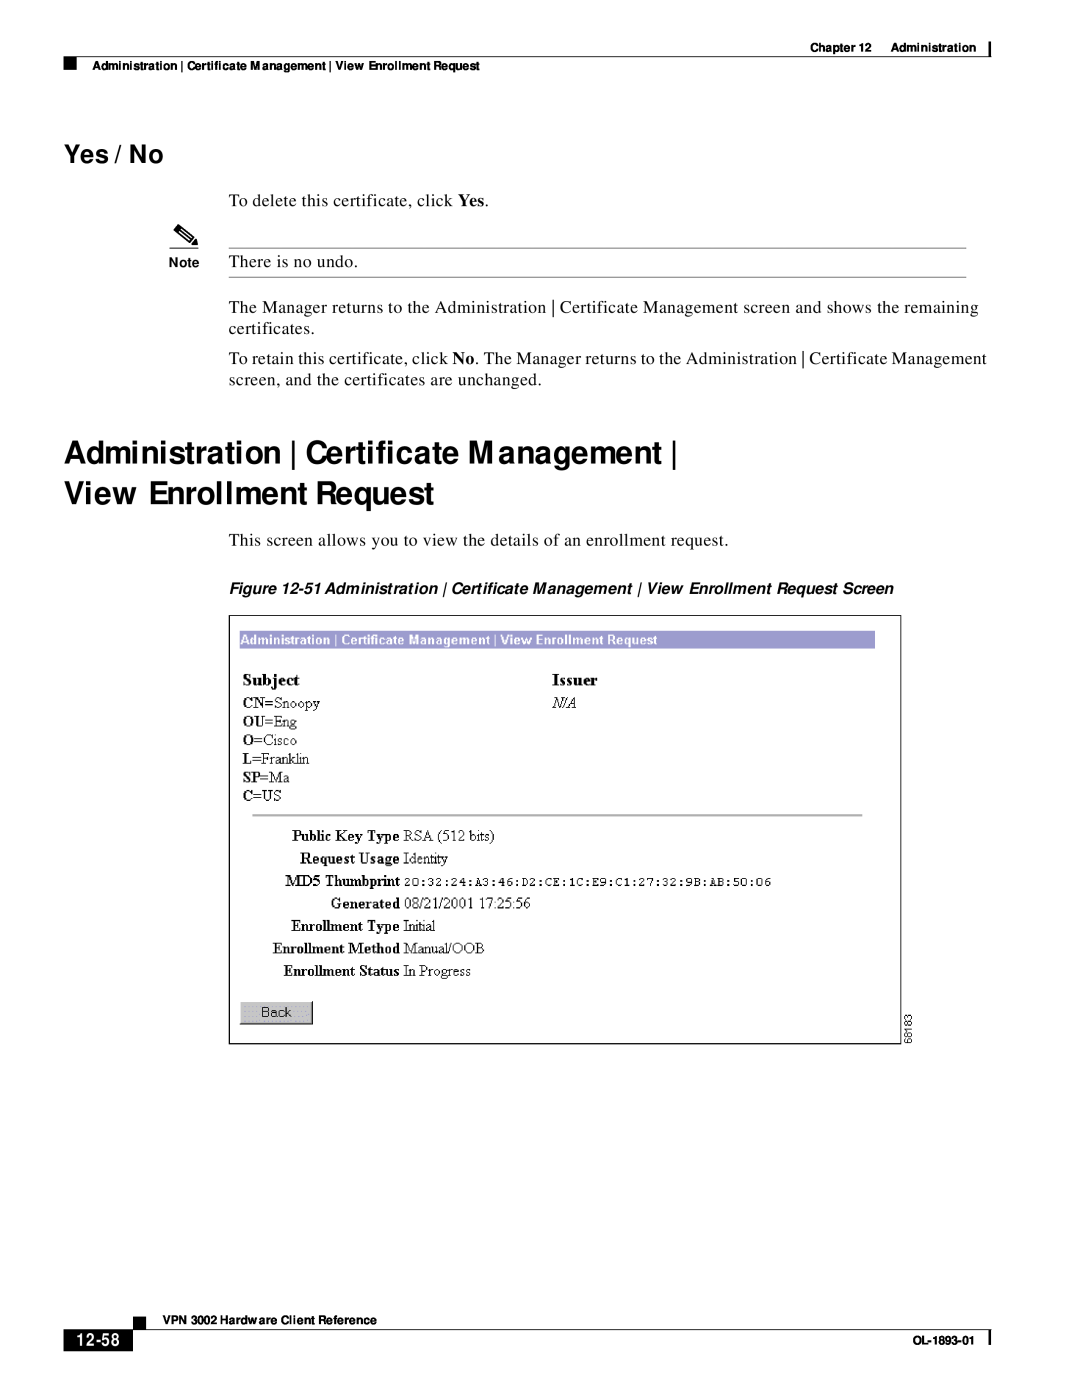 Cisco Systems VPN 3002 manual View Enrollment Request, Yes / No, 12-58, Administration | Certificate Management 